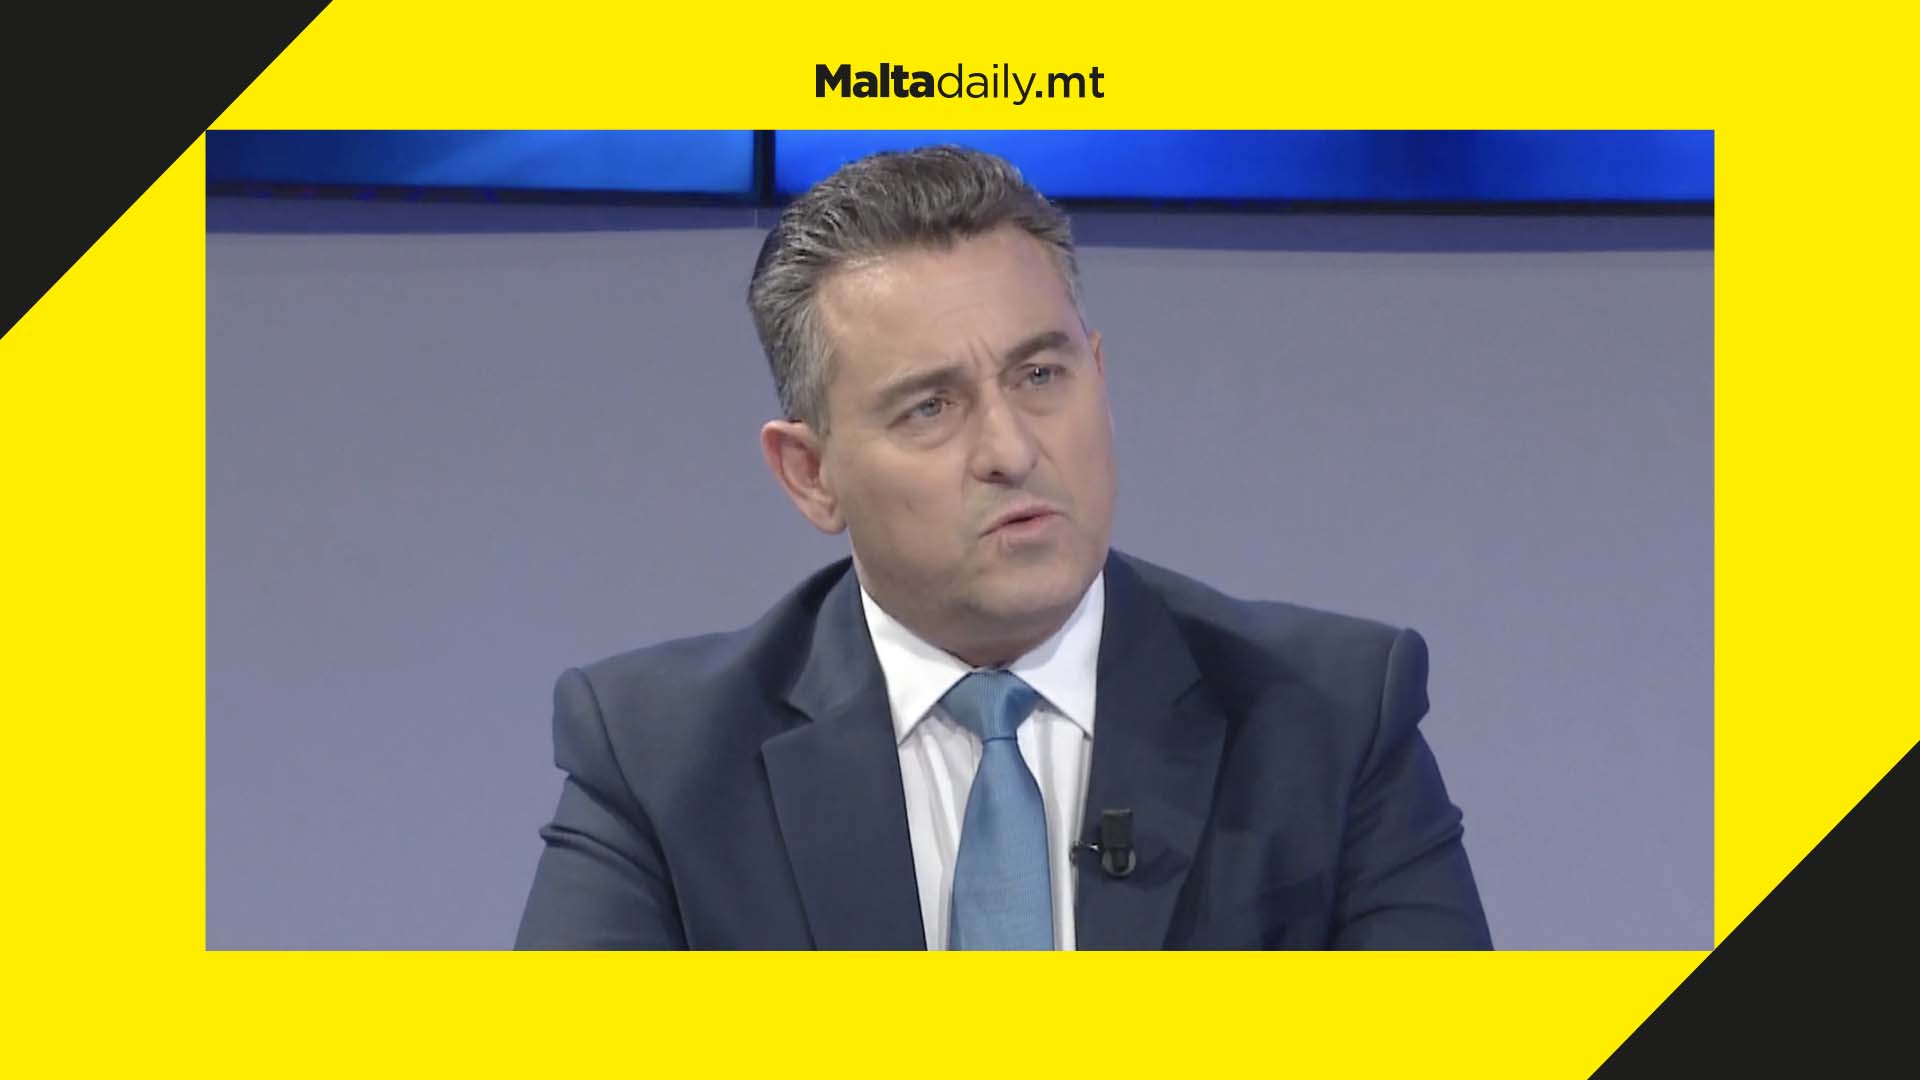 WATCH: Bernard Grech states that the Nationalist Party "has already started renewal"